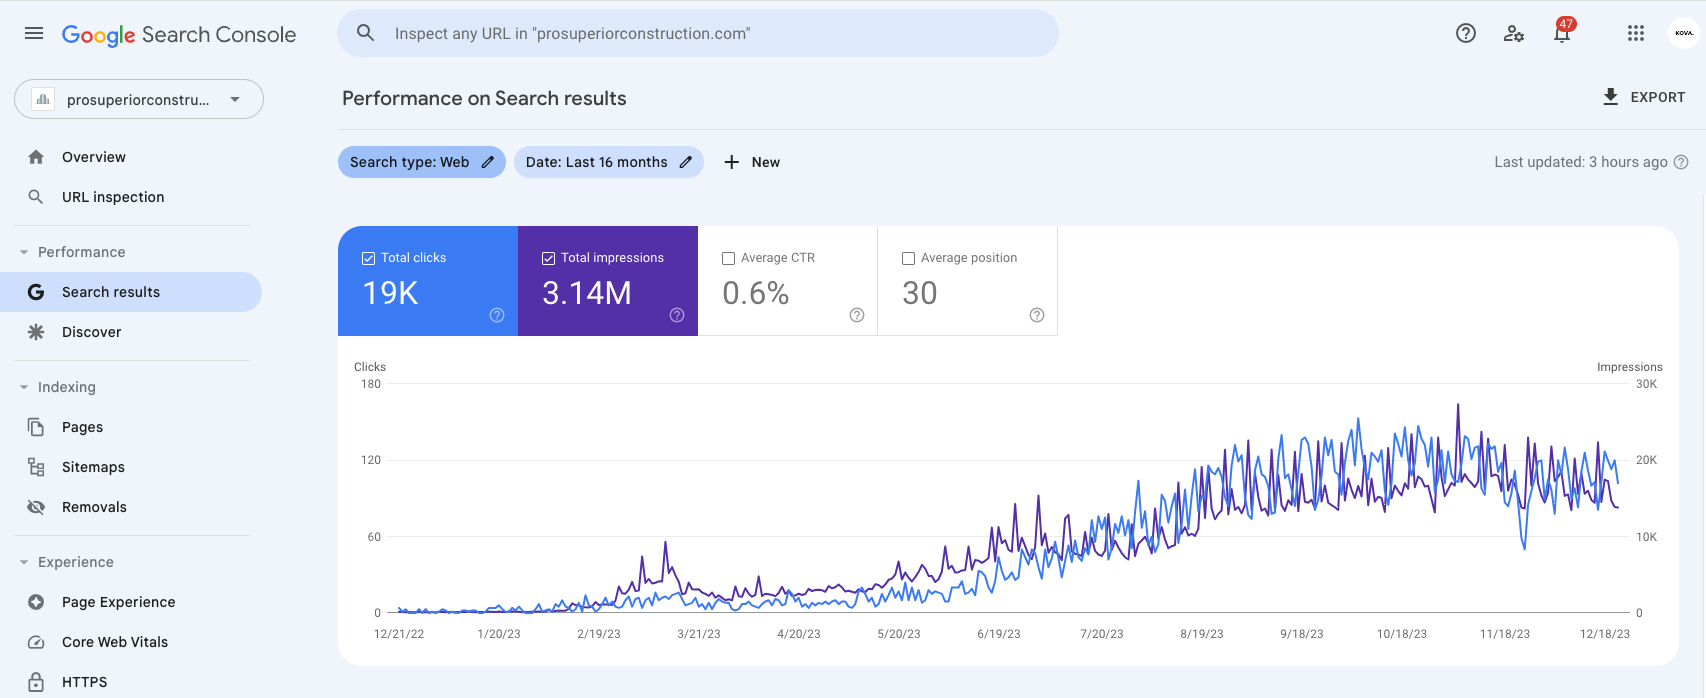 Pro Superior Construction website google search console showing 19k website traffic in the last 16 months